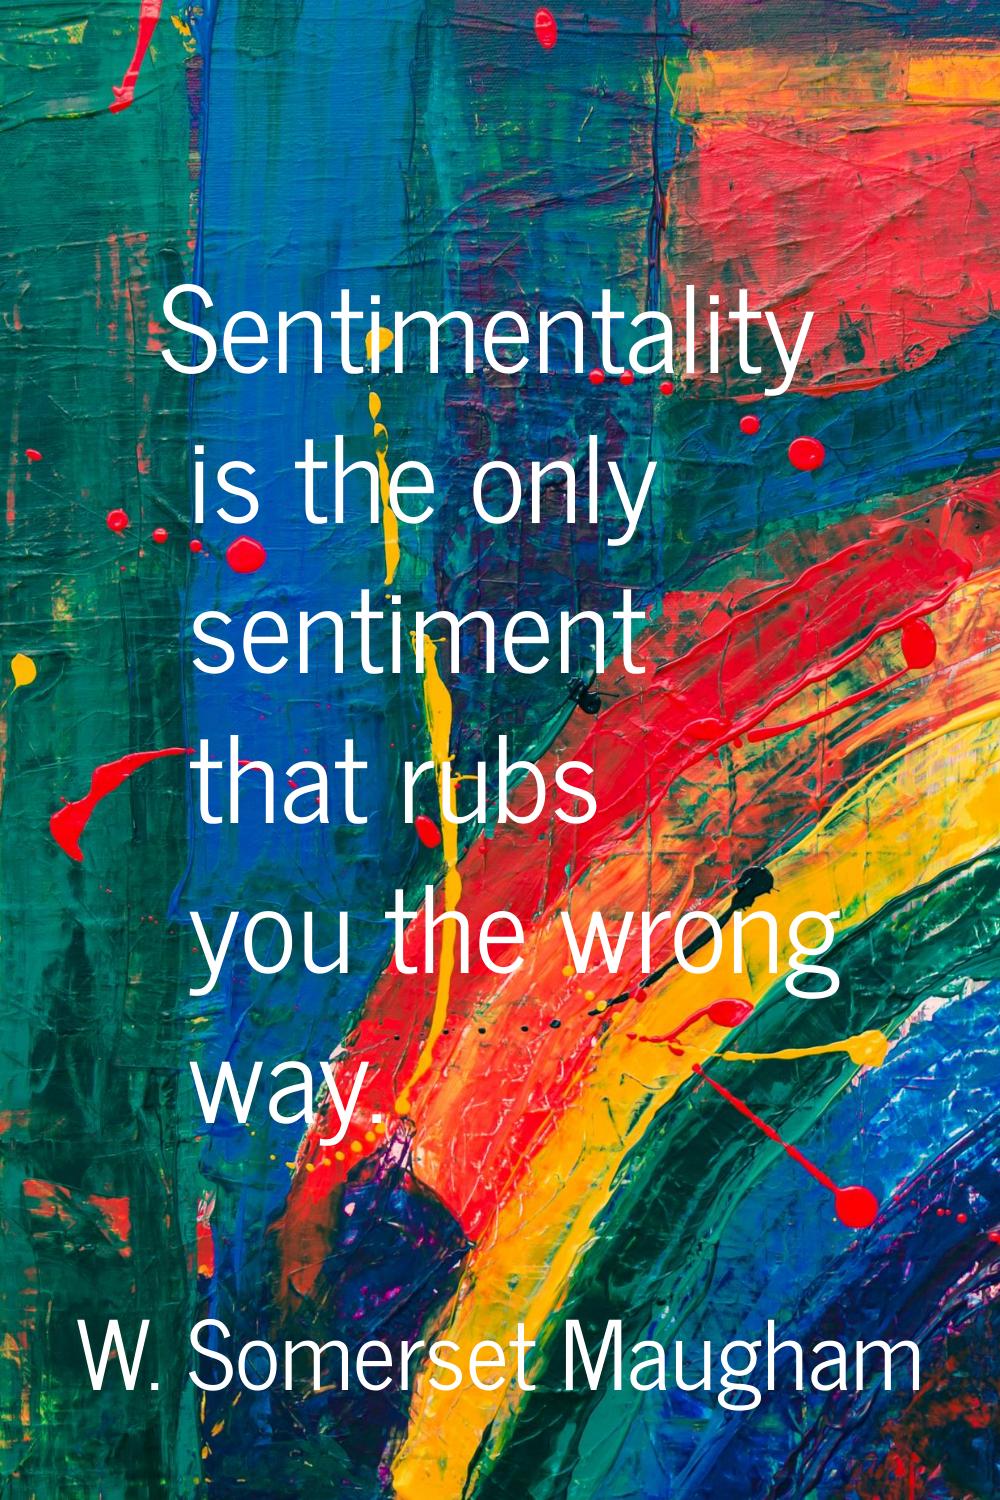 Sentimentality is the only sentiment that rubs you the wrong way.